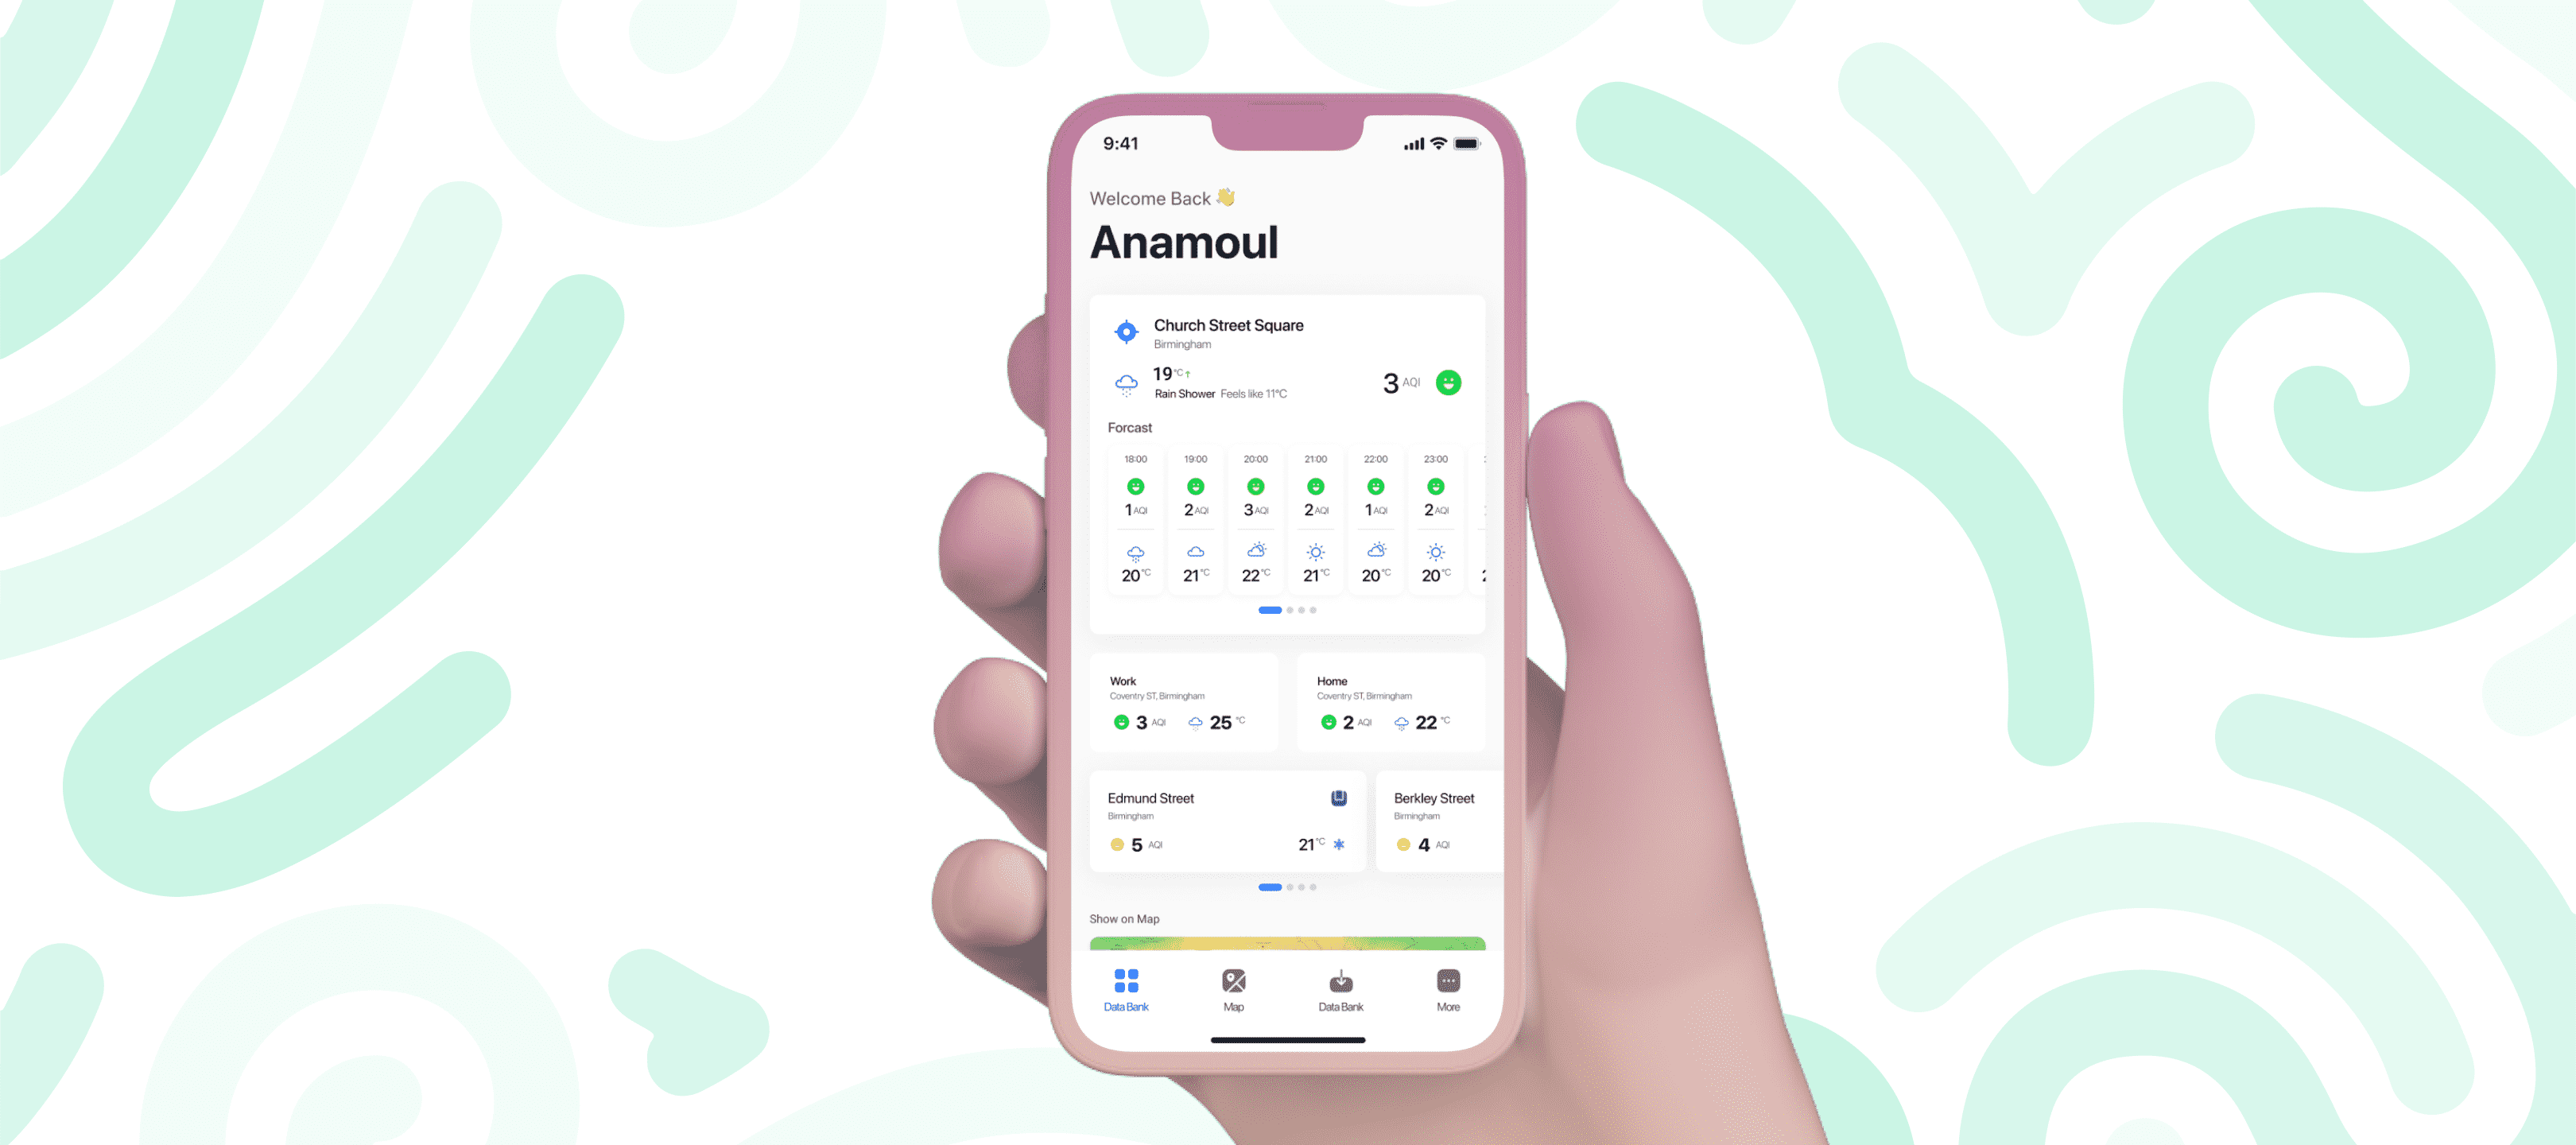 AirQI provides real-time and forecast air pollution and weather data. Our main challenge is to design a hybrid app that provides an intuitive customize experience to its users.